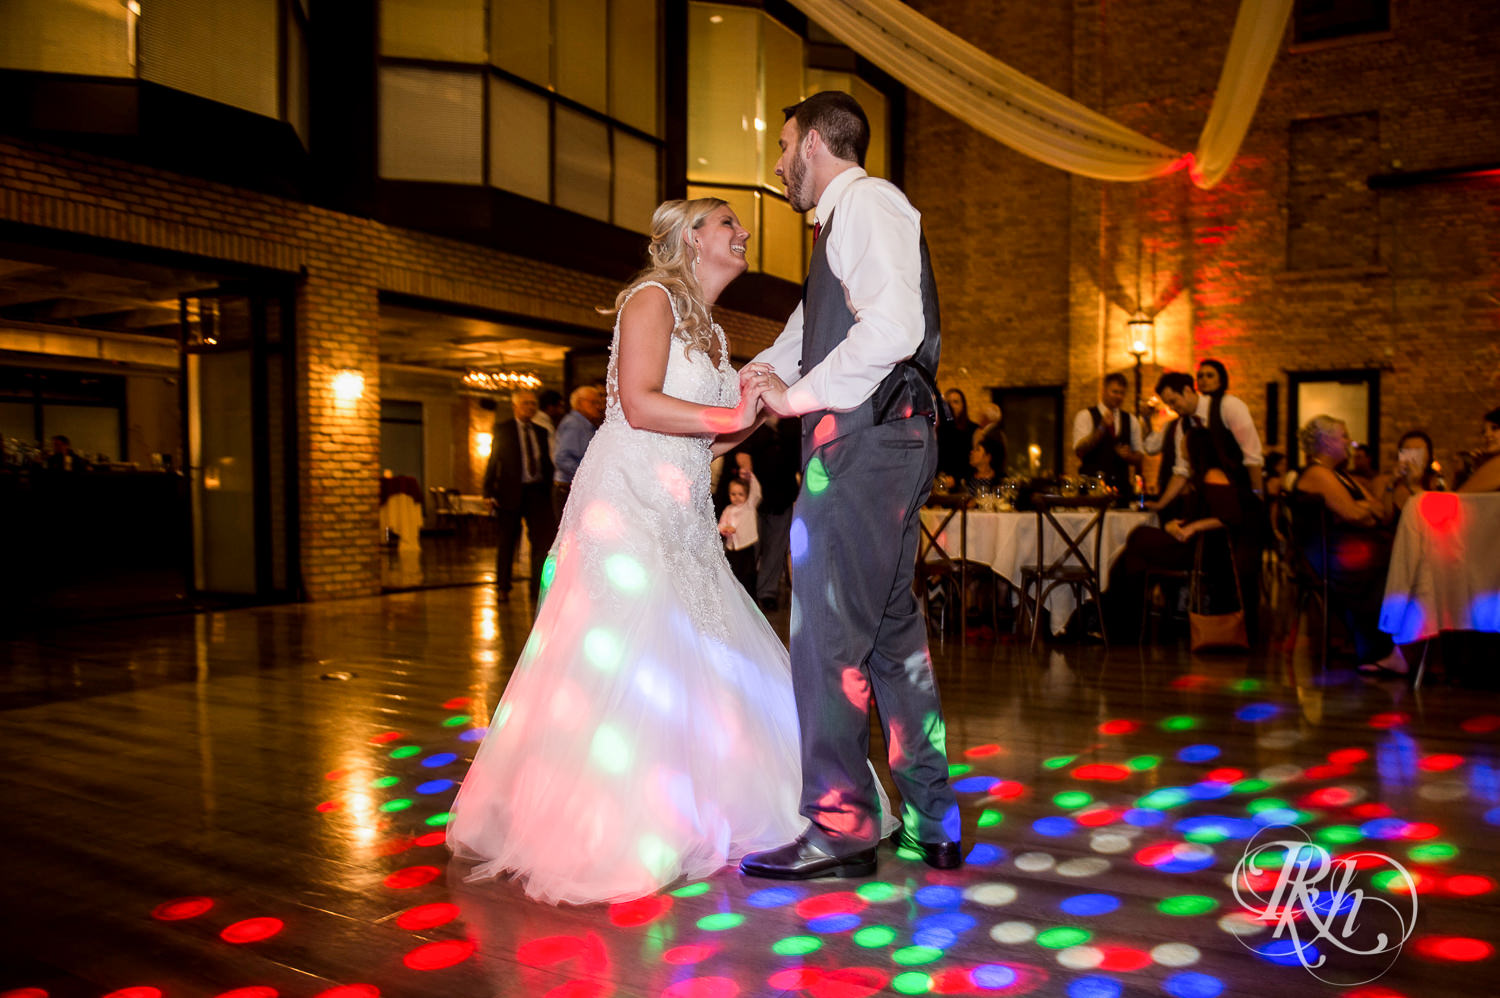 Bride and groom dance at wedding reception at the Lumber Exchange Event Center in Minneapolis, Minnesota.